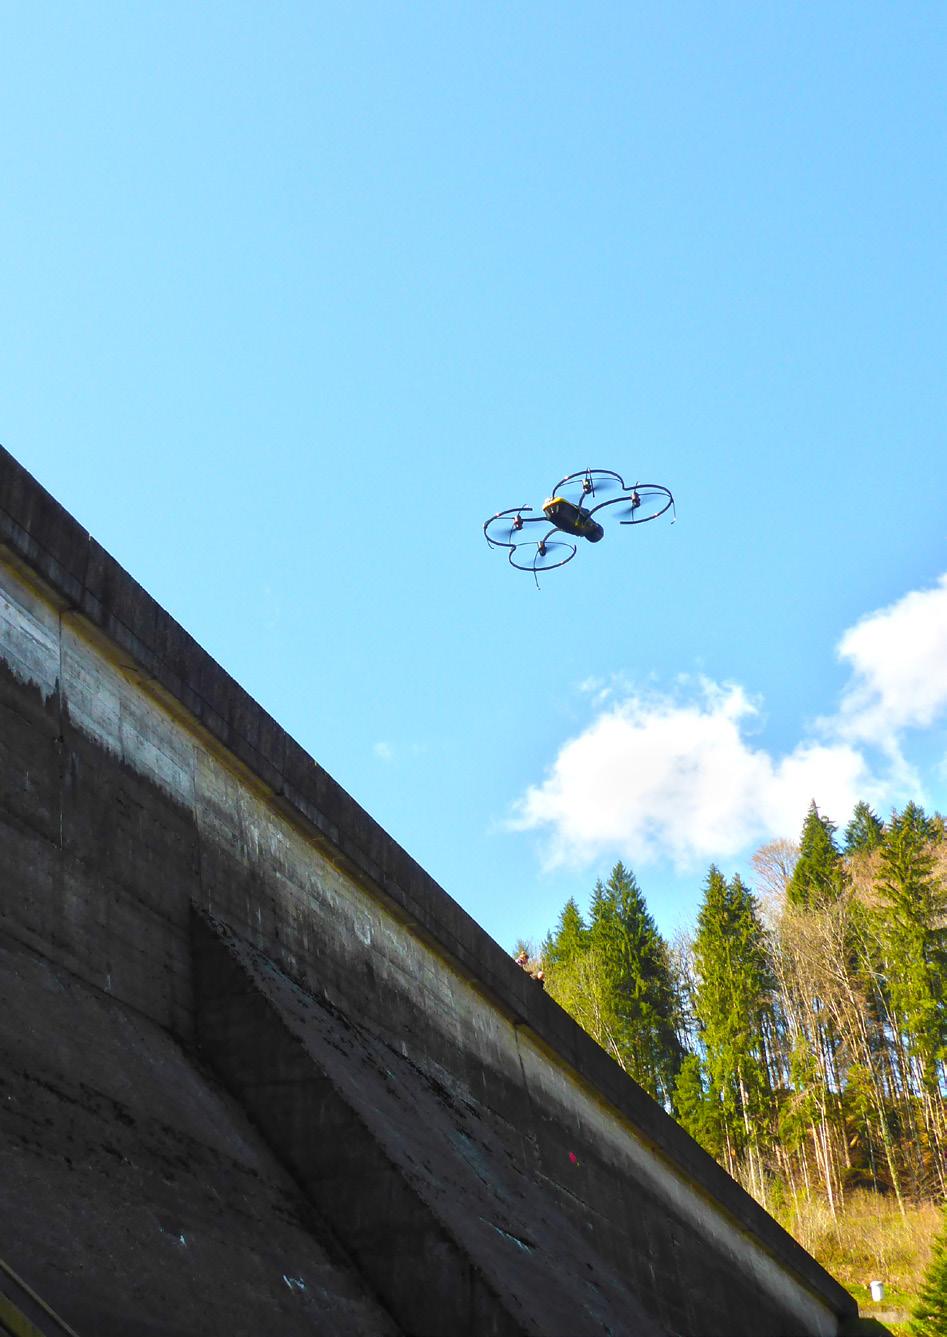 Proven ROI across multiple applications sensefly s albris is a truly inspection-focused platform that is employed by civil engineers around the globe.